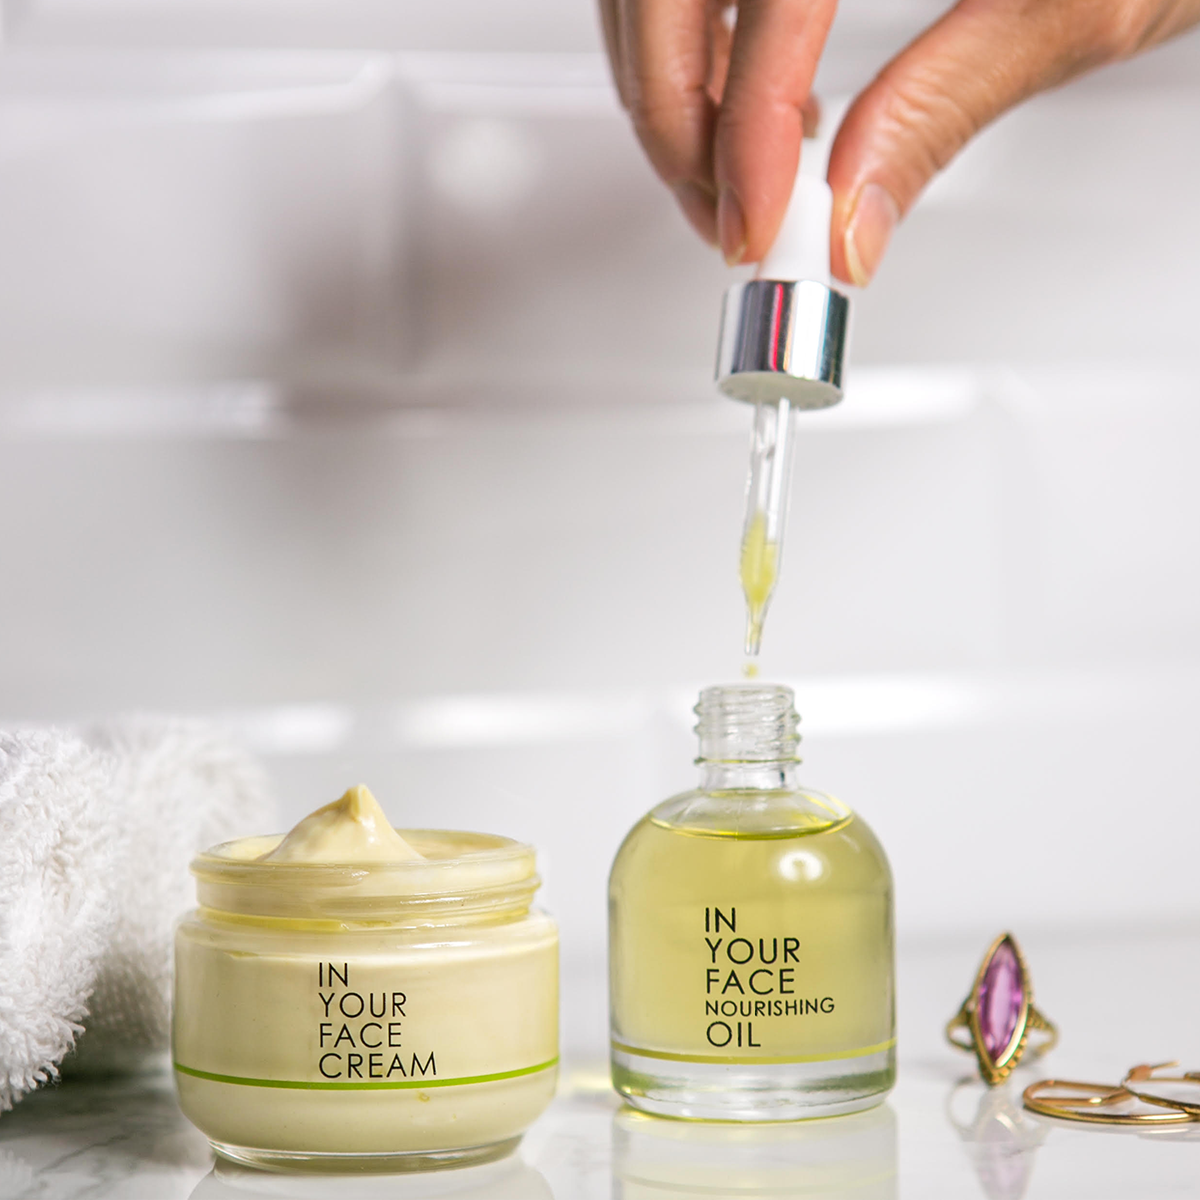 an image of the IN YOUR FACE CREAM and IN YOUR NOURISHING OIL on a tiled background. A hand is reaching down to the OIL's pippette and taking some oil out of the bottle. 